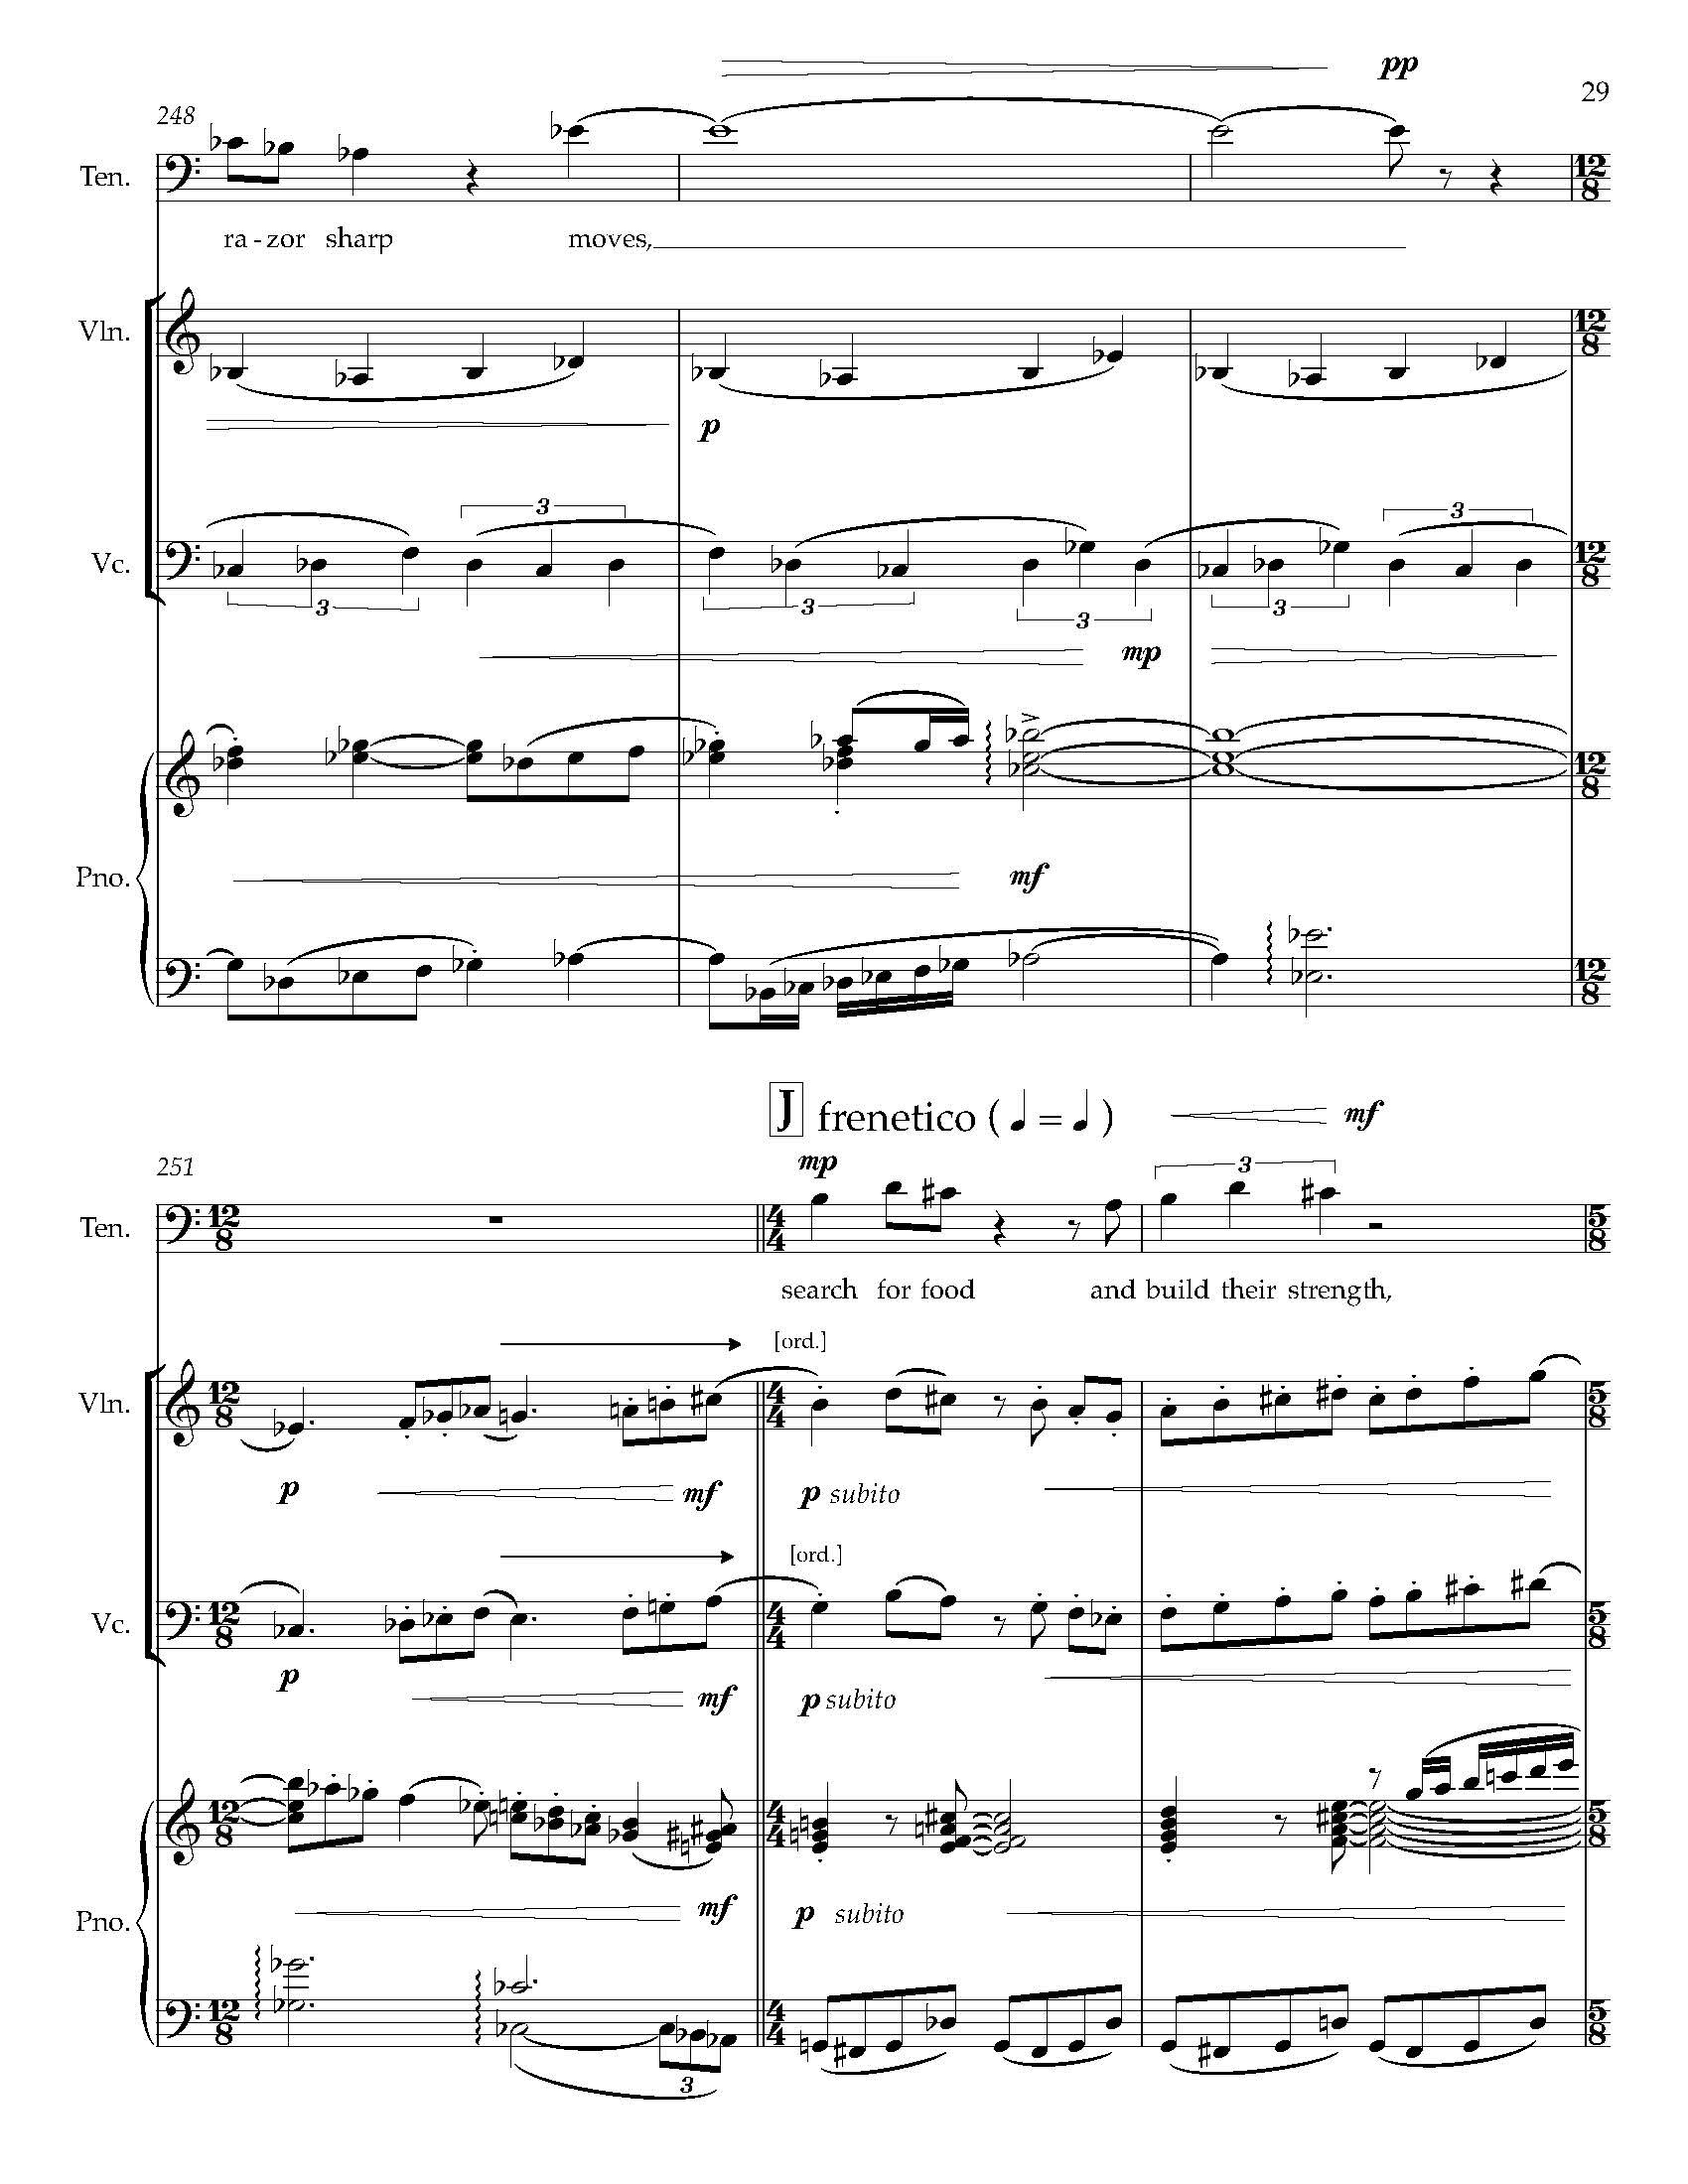 Gursky Songs - Complete Score_Page_37.jpg